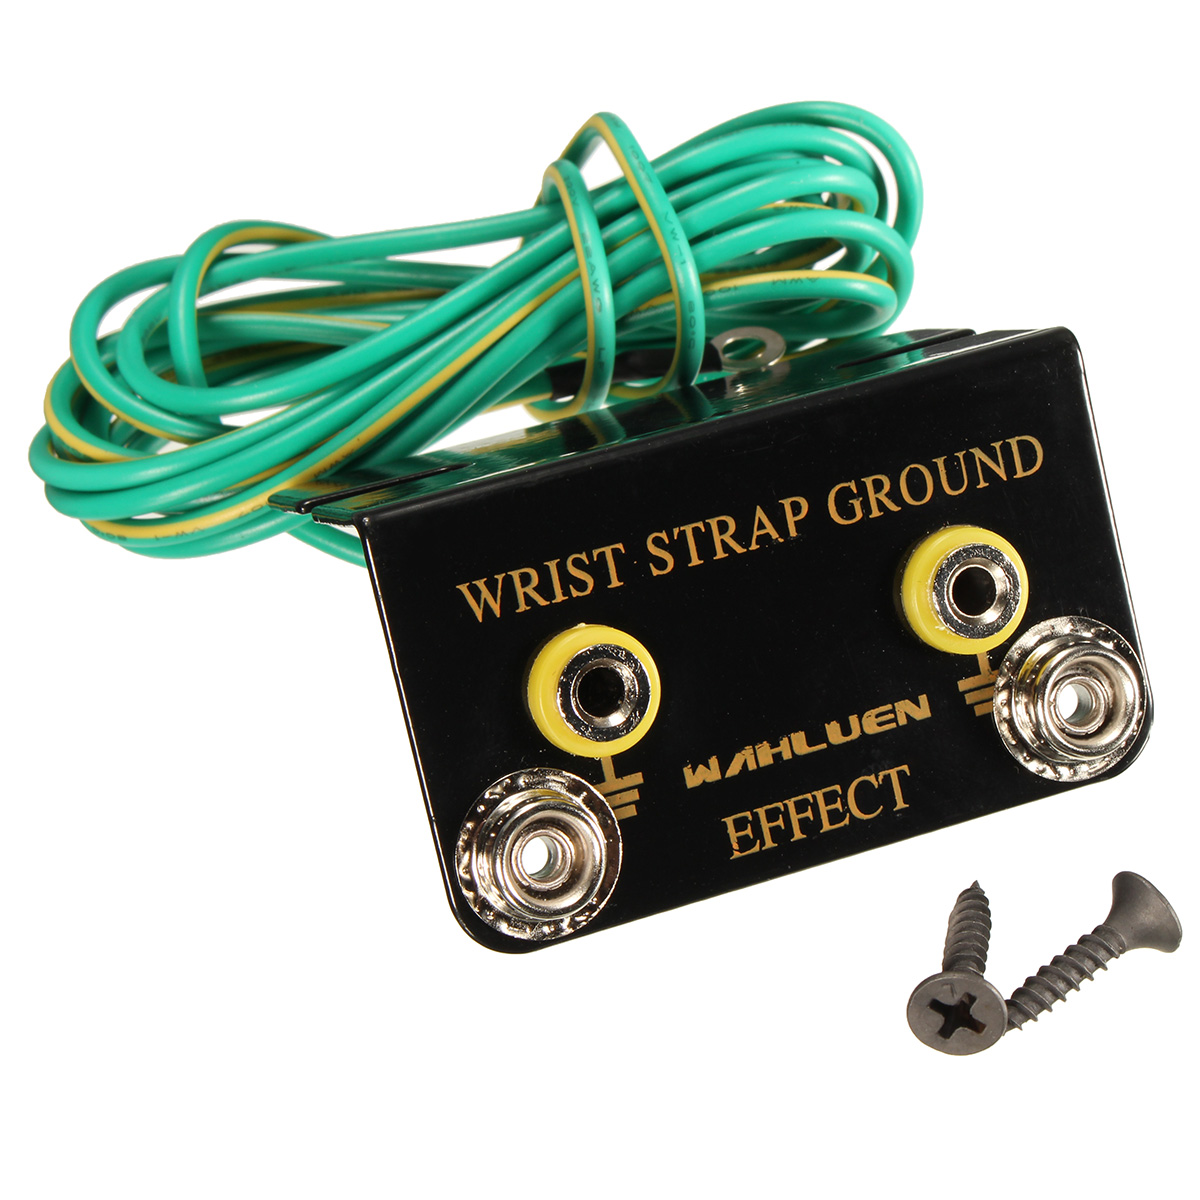 19m-ESD-Ring-Terminal-Cable-Anti-Static-L-Shape-Socket-Ground-For-Wrist-Strap-1044430